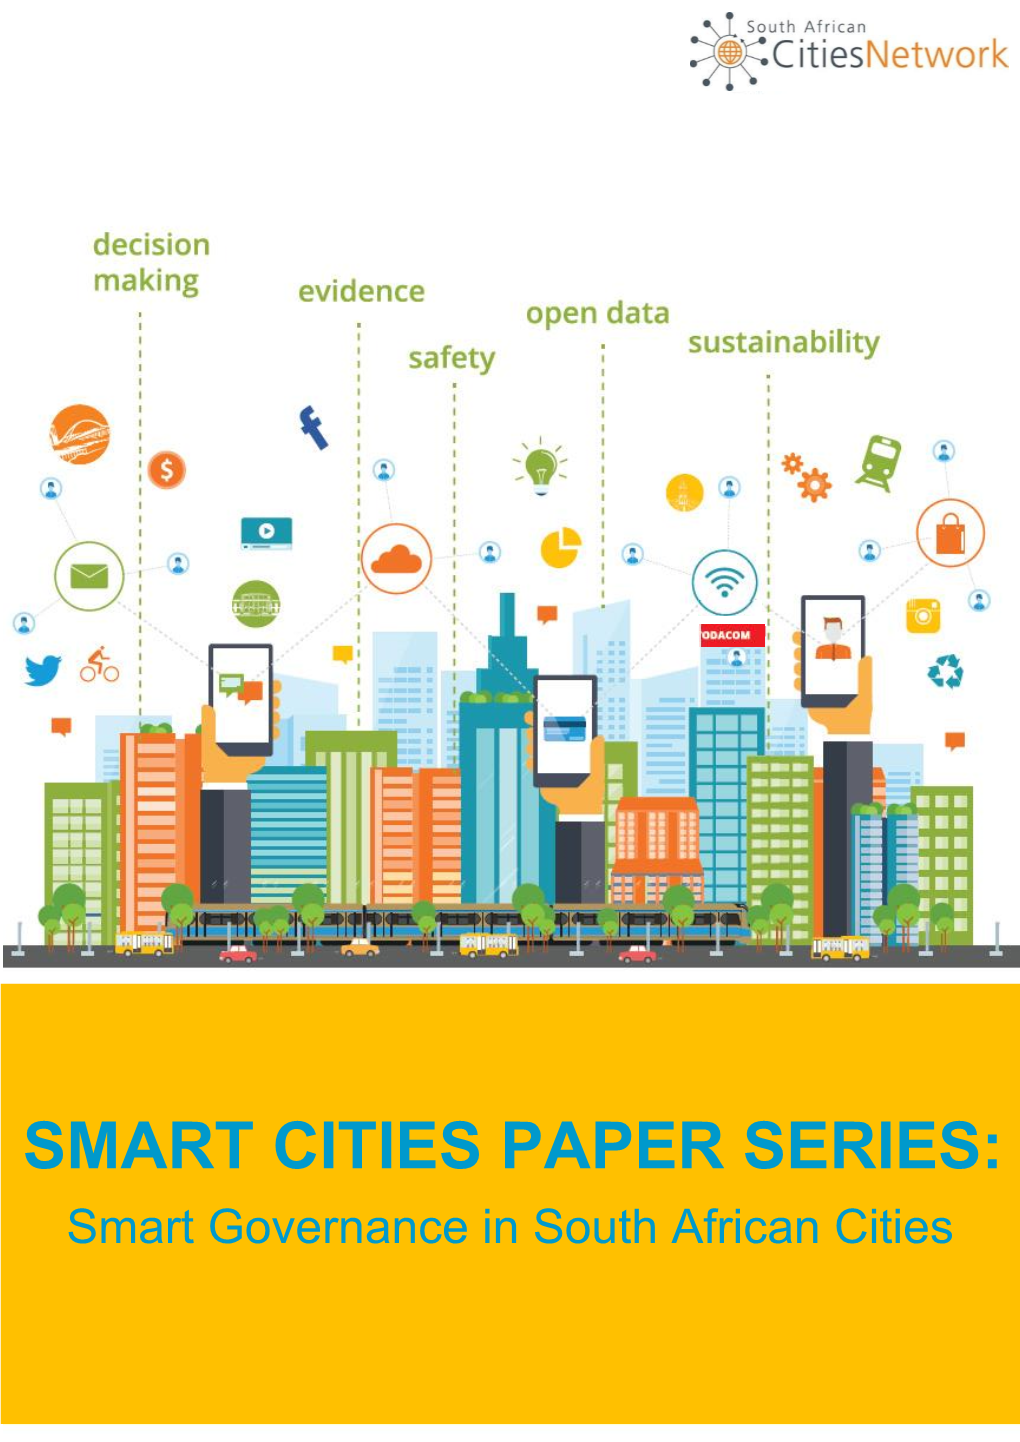 SMART CITIES PAPER SERIES: Smart Governance in South African Cities